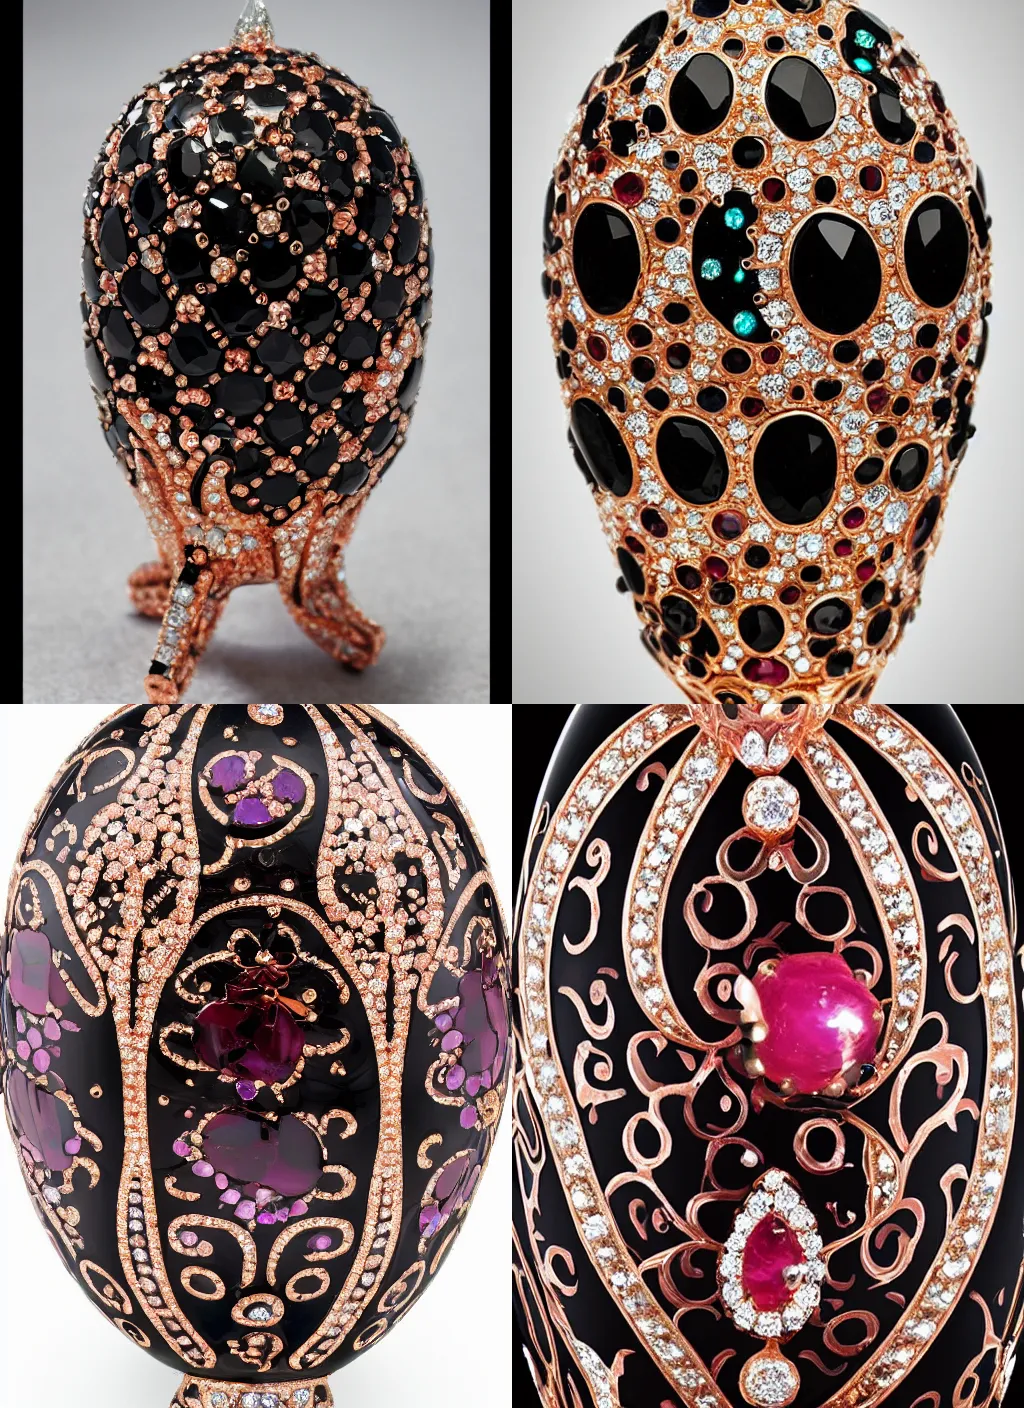 Prompt: elaborate faberge egg black and rose gold diamonds opals rubies ornate, 4 k, reflections